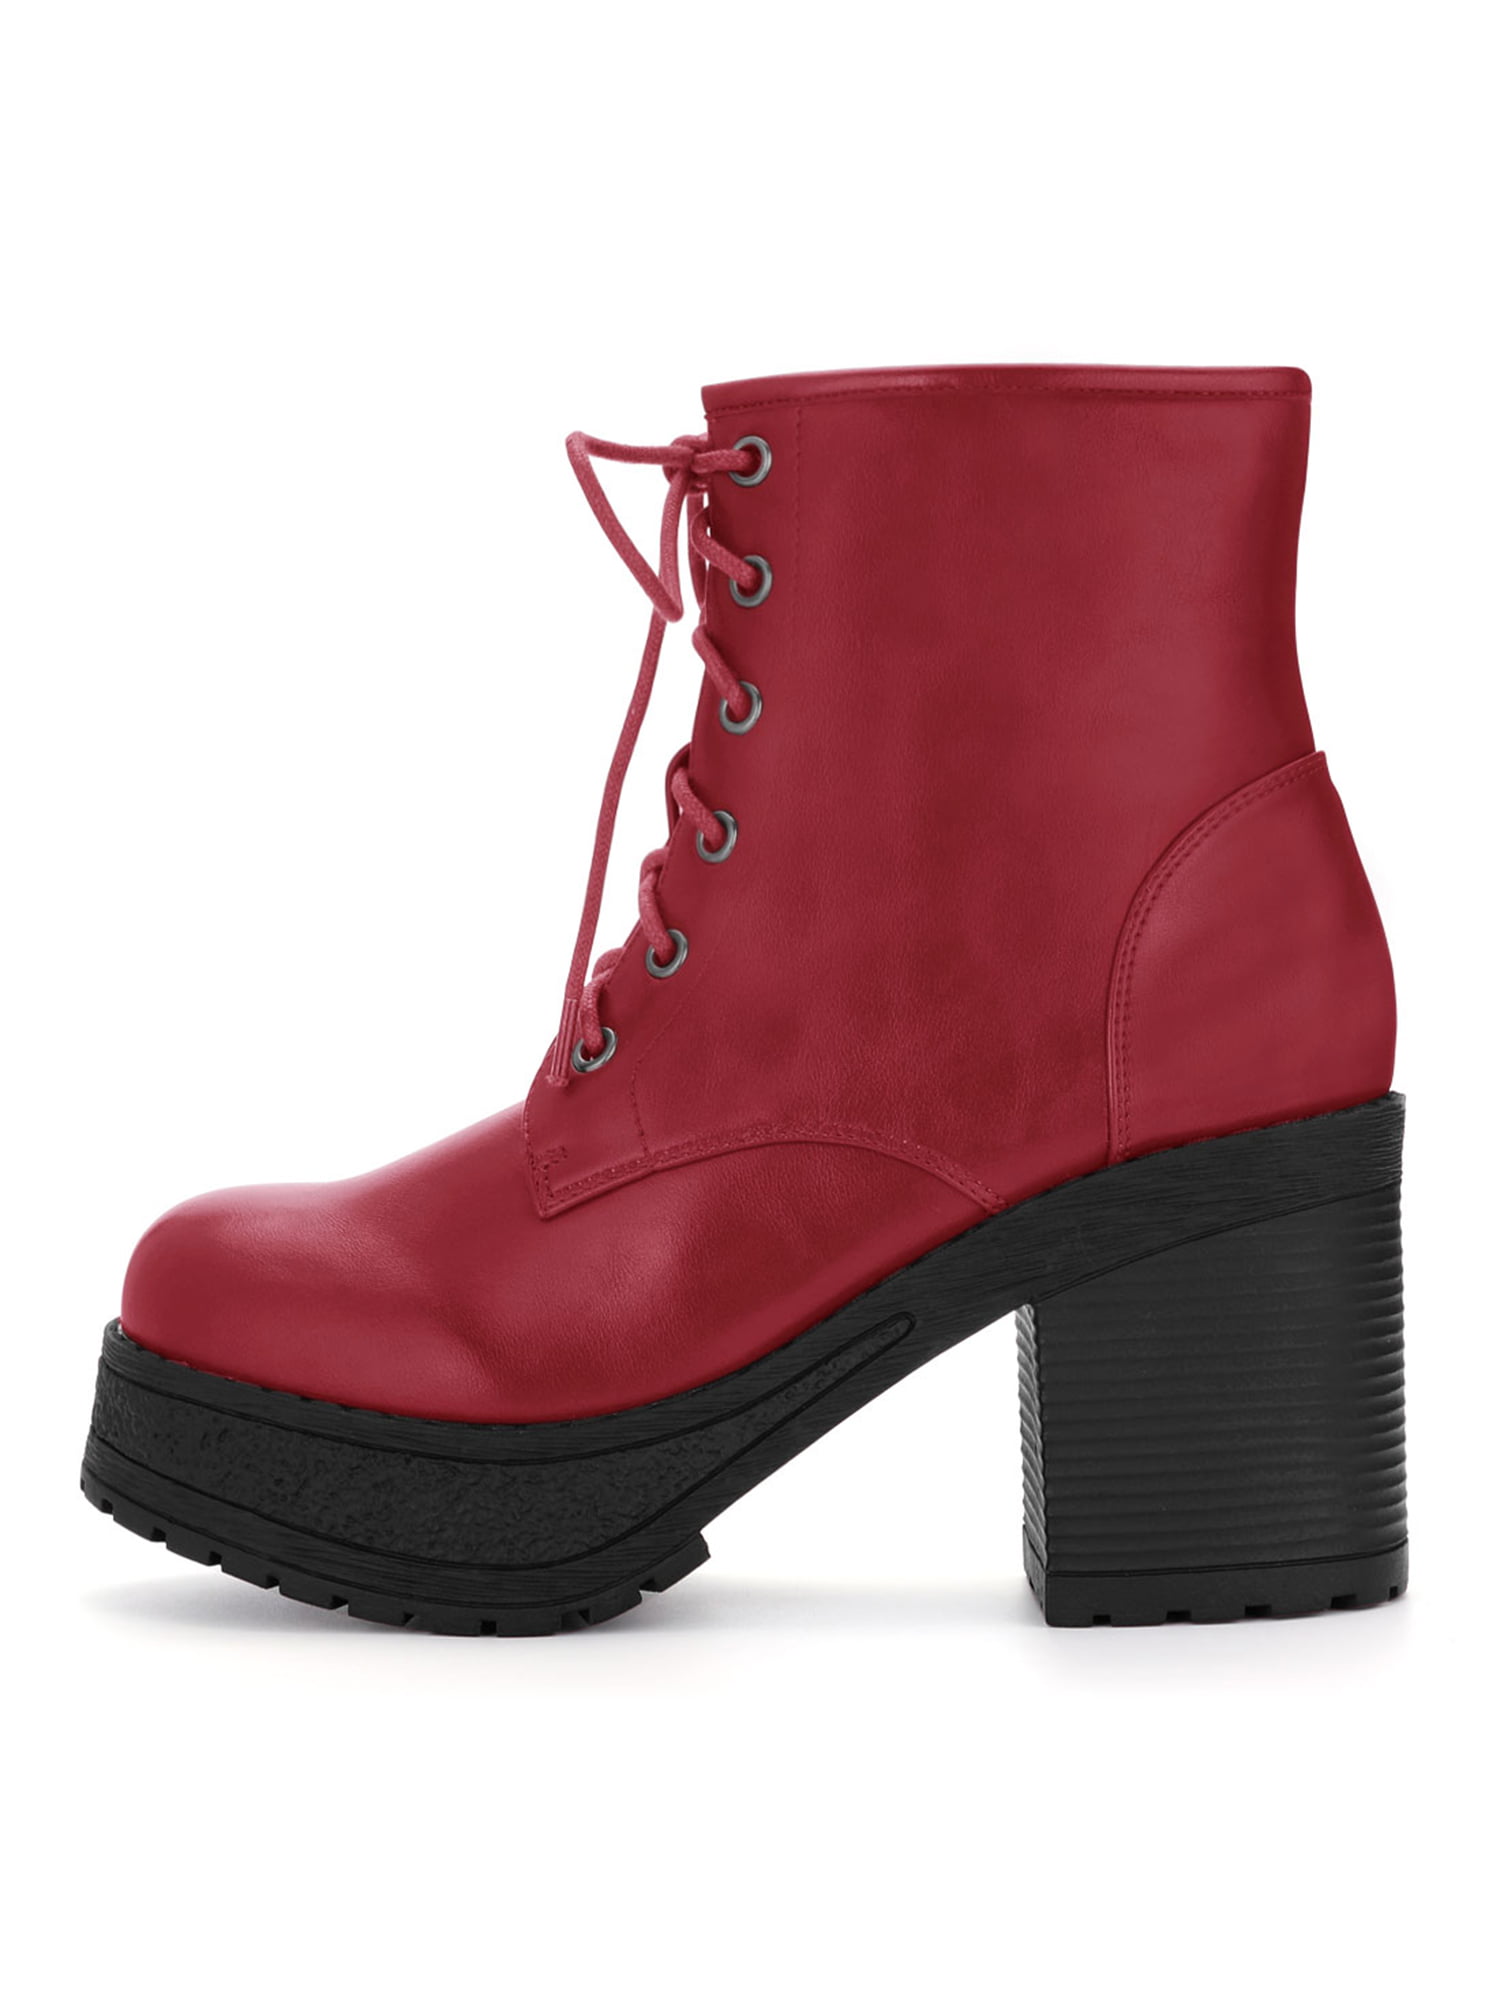 Women Chunky Heel Platform Lace Up Ankle Combat Boots Red US 5 ...